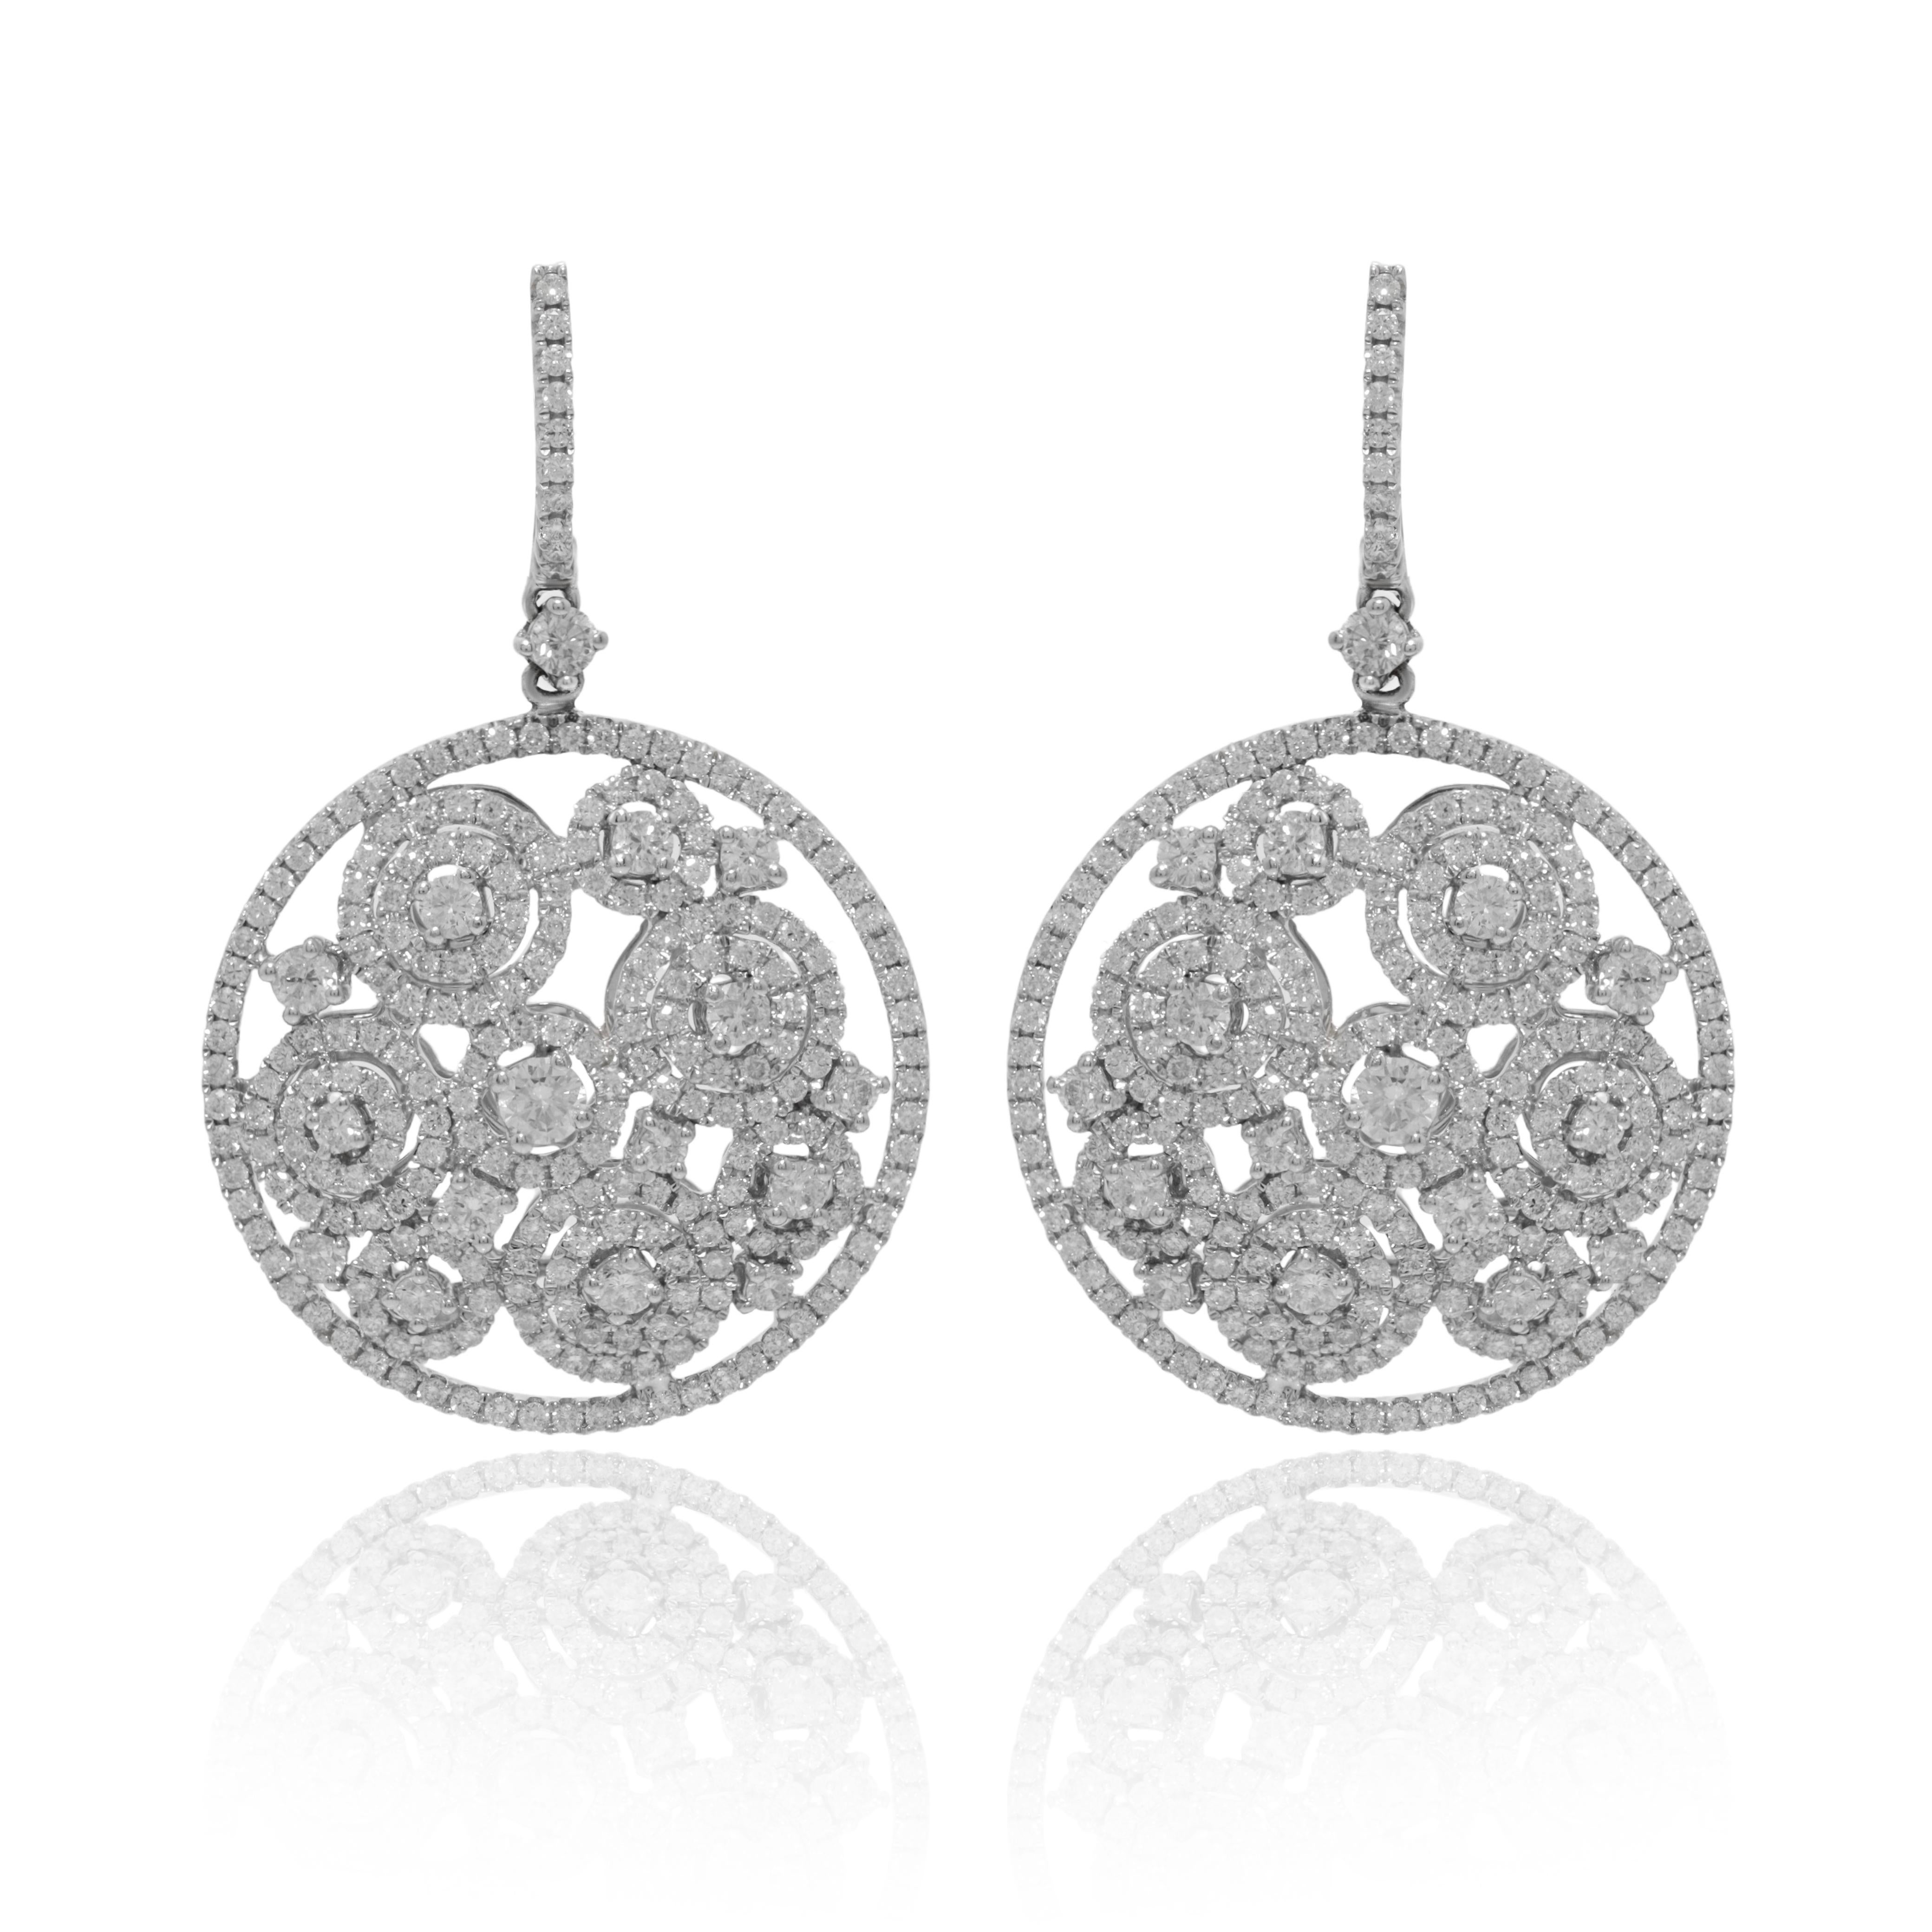 18 kt white gold multicircle earrings adorned with 4.18 cts tw of round diamonds.
Diana M. is a leading supplier of top-quality fine jewelry for over 35 years.
Diana M is one-stop shop for all your jewelry shopping, carrying line of diamond rings,